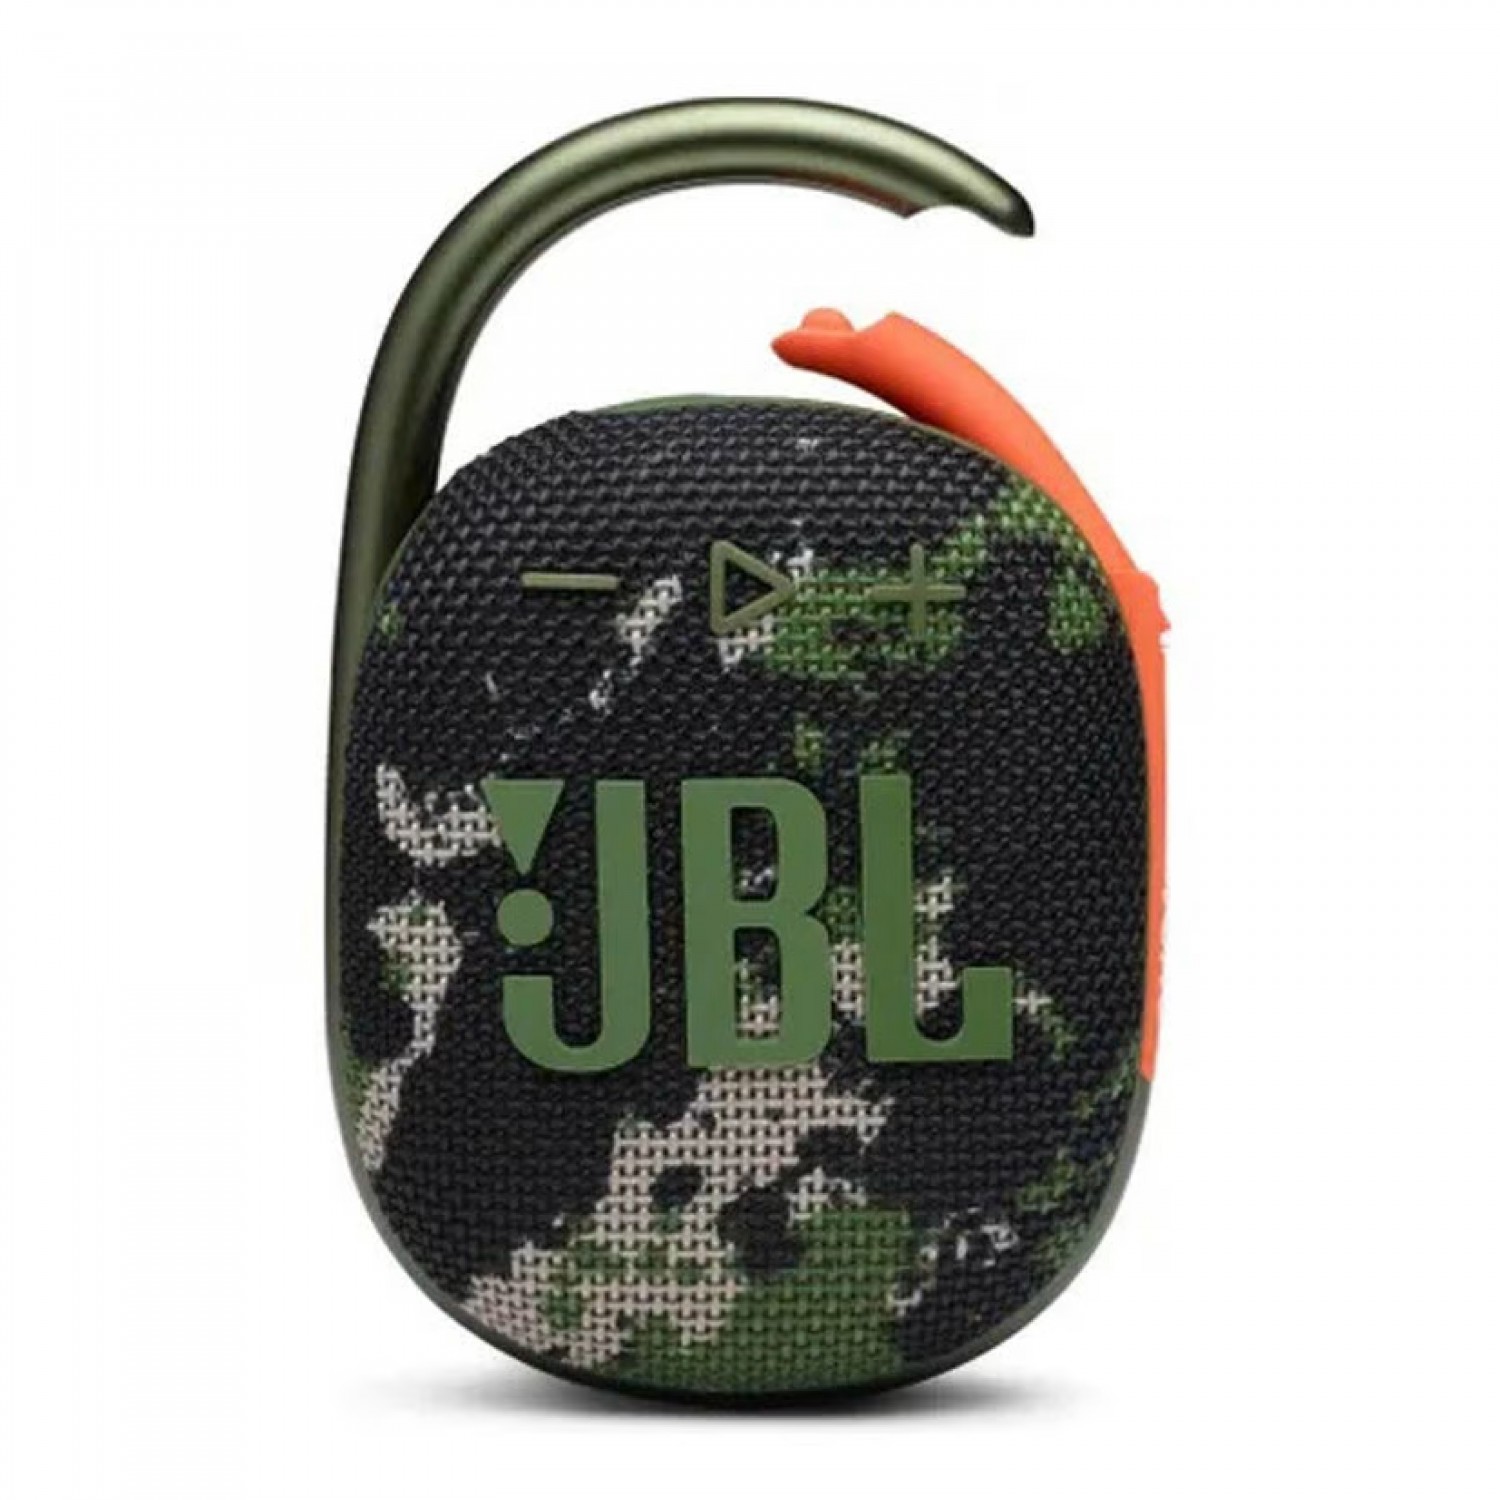 JBL Clip 4 Price in Nepal, Specifications, Availability